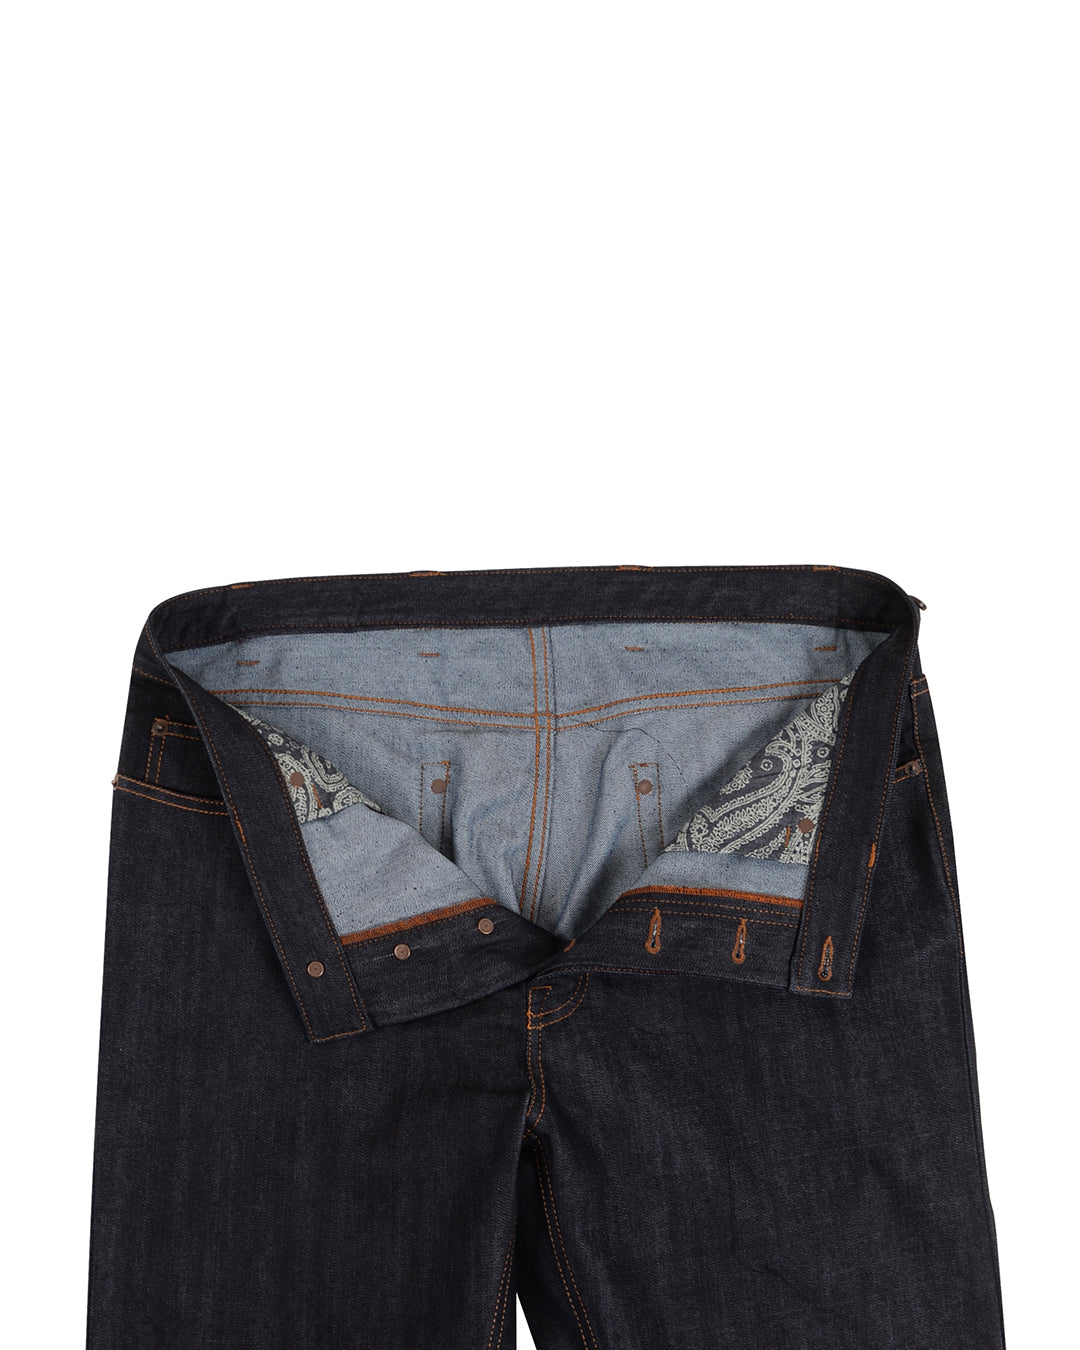 Front open view of custom denim jeans for men by Luxire in midnight blue